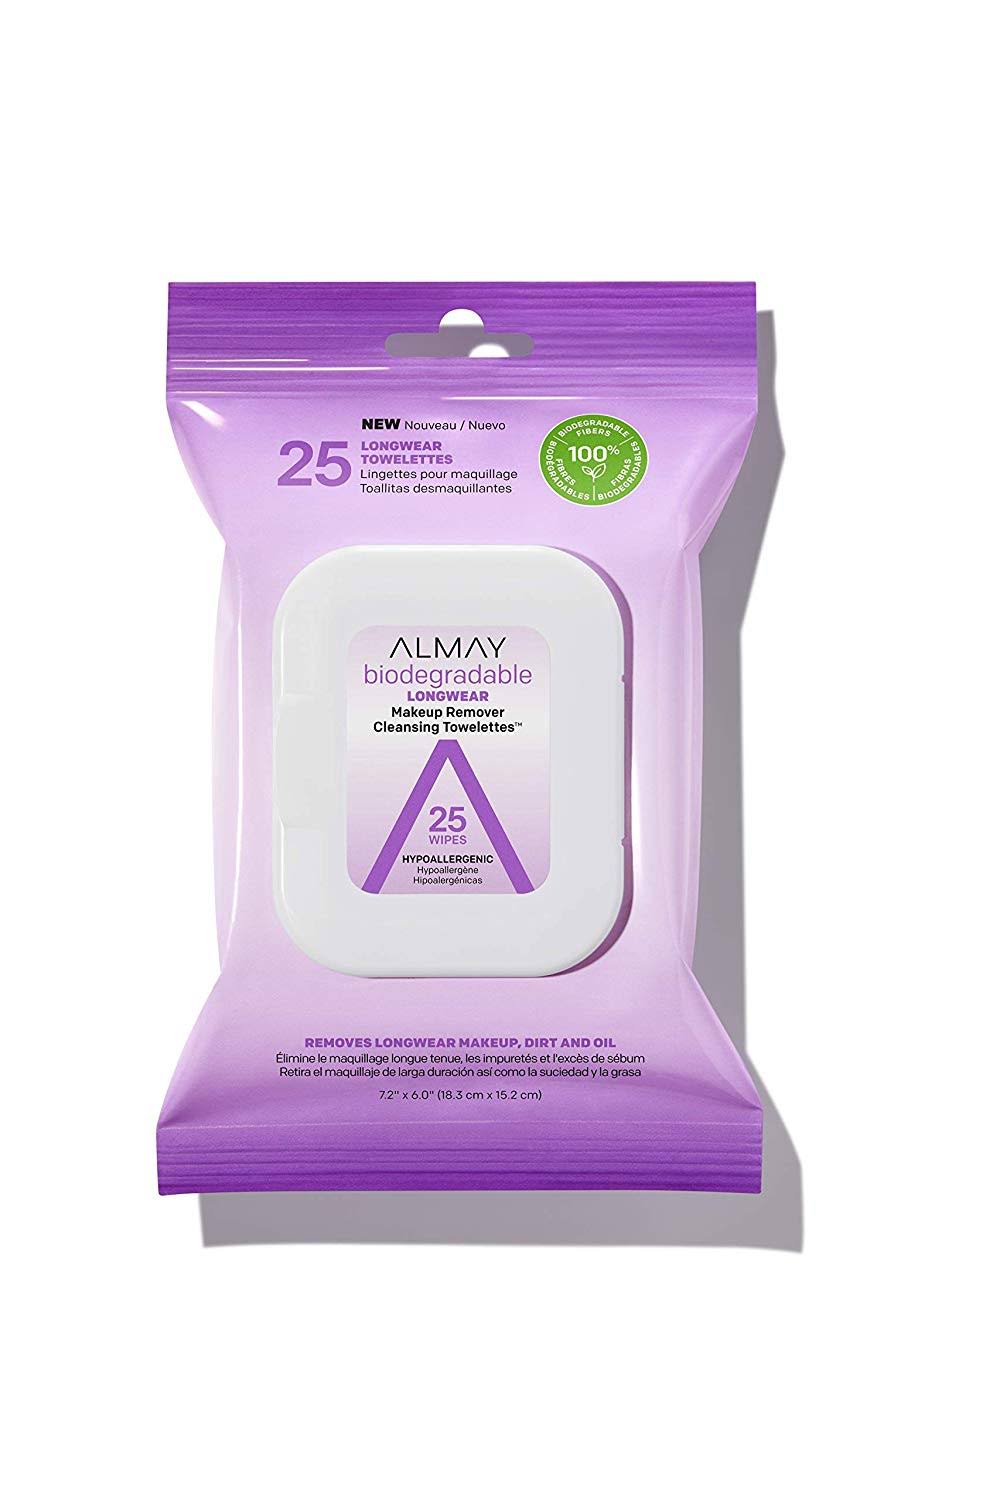 Almay Biodegradable Longwear Makeup Remover Cleansing Towelettes